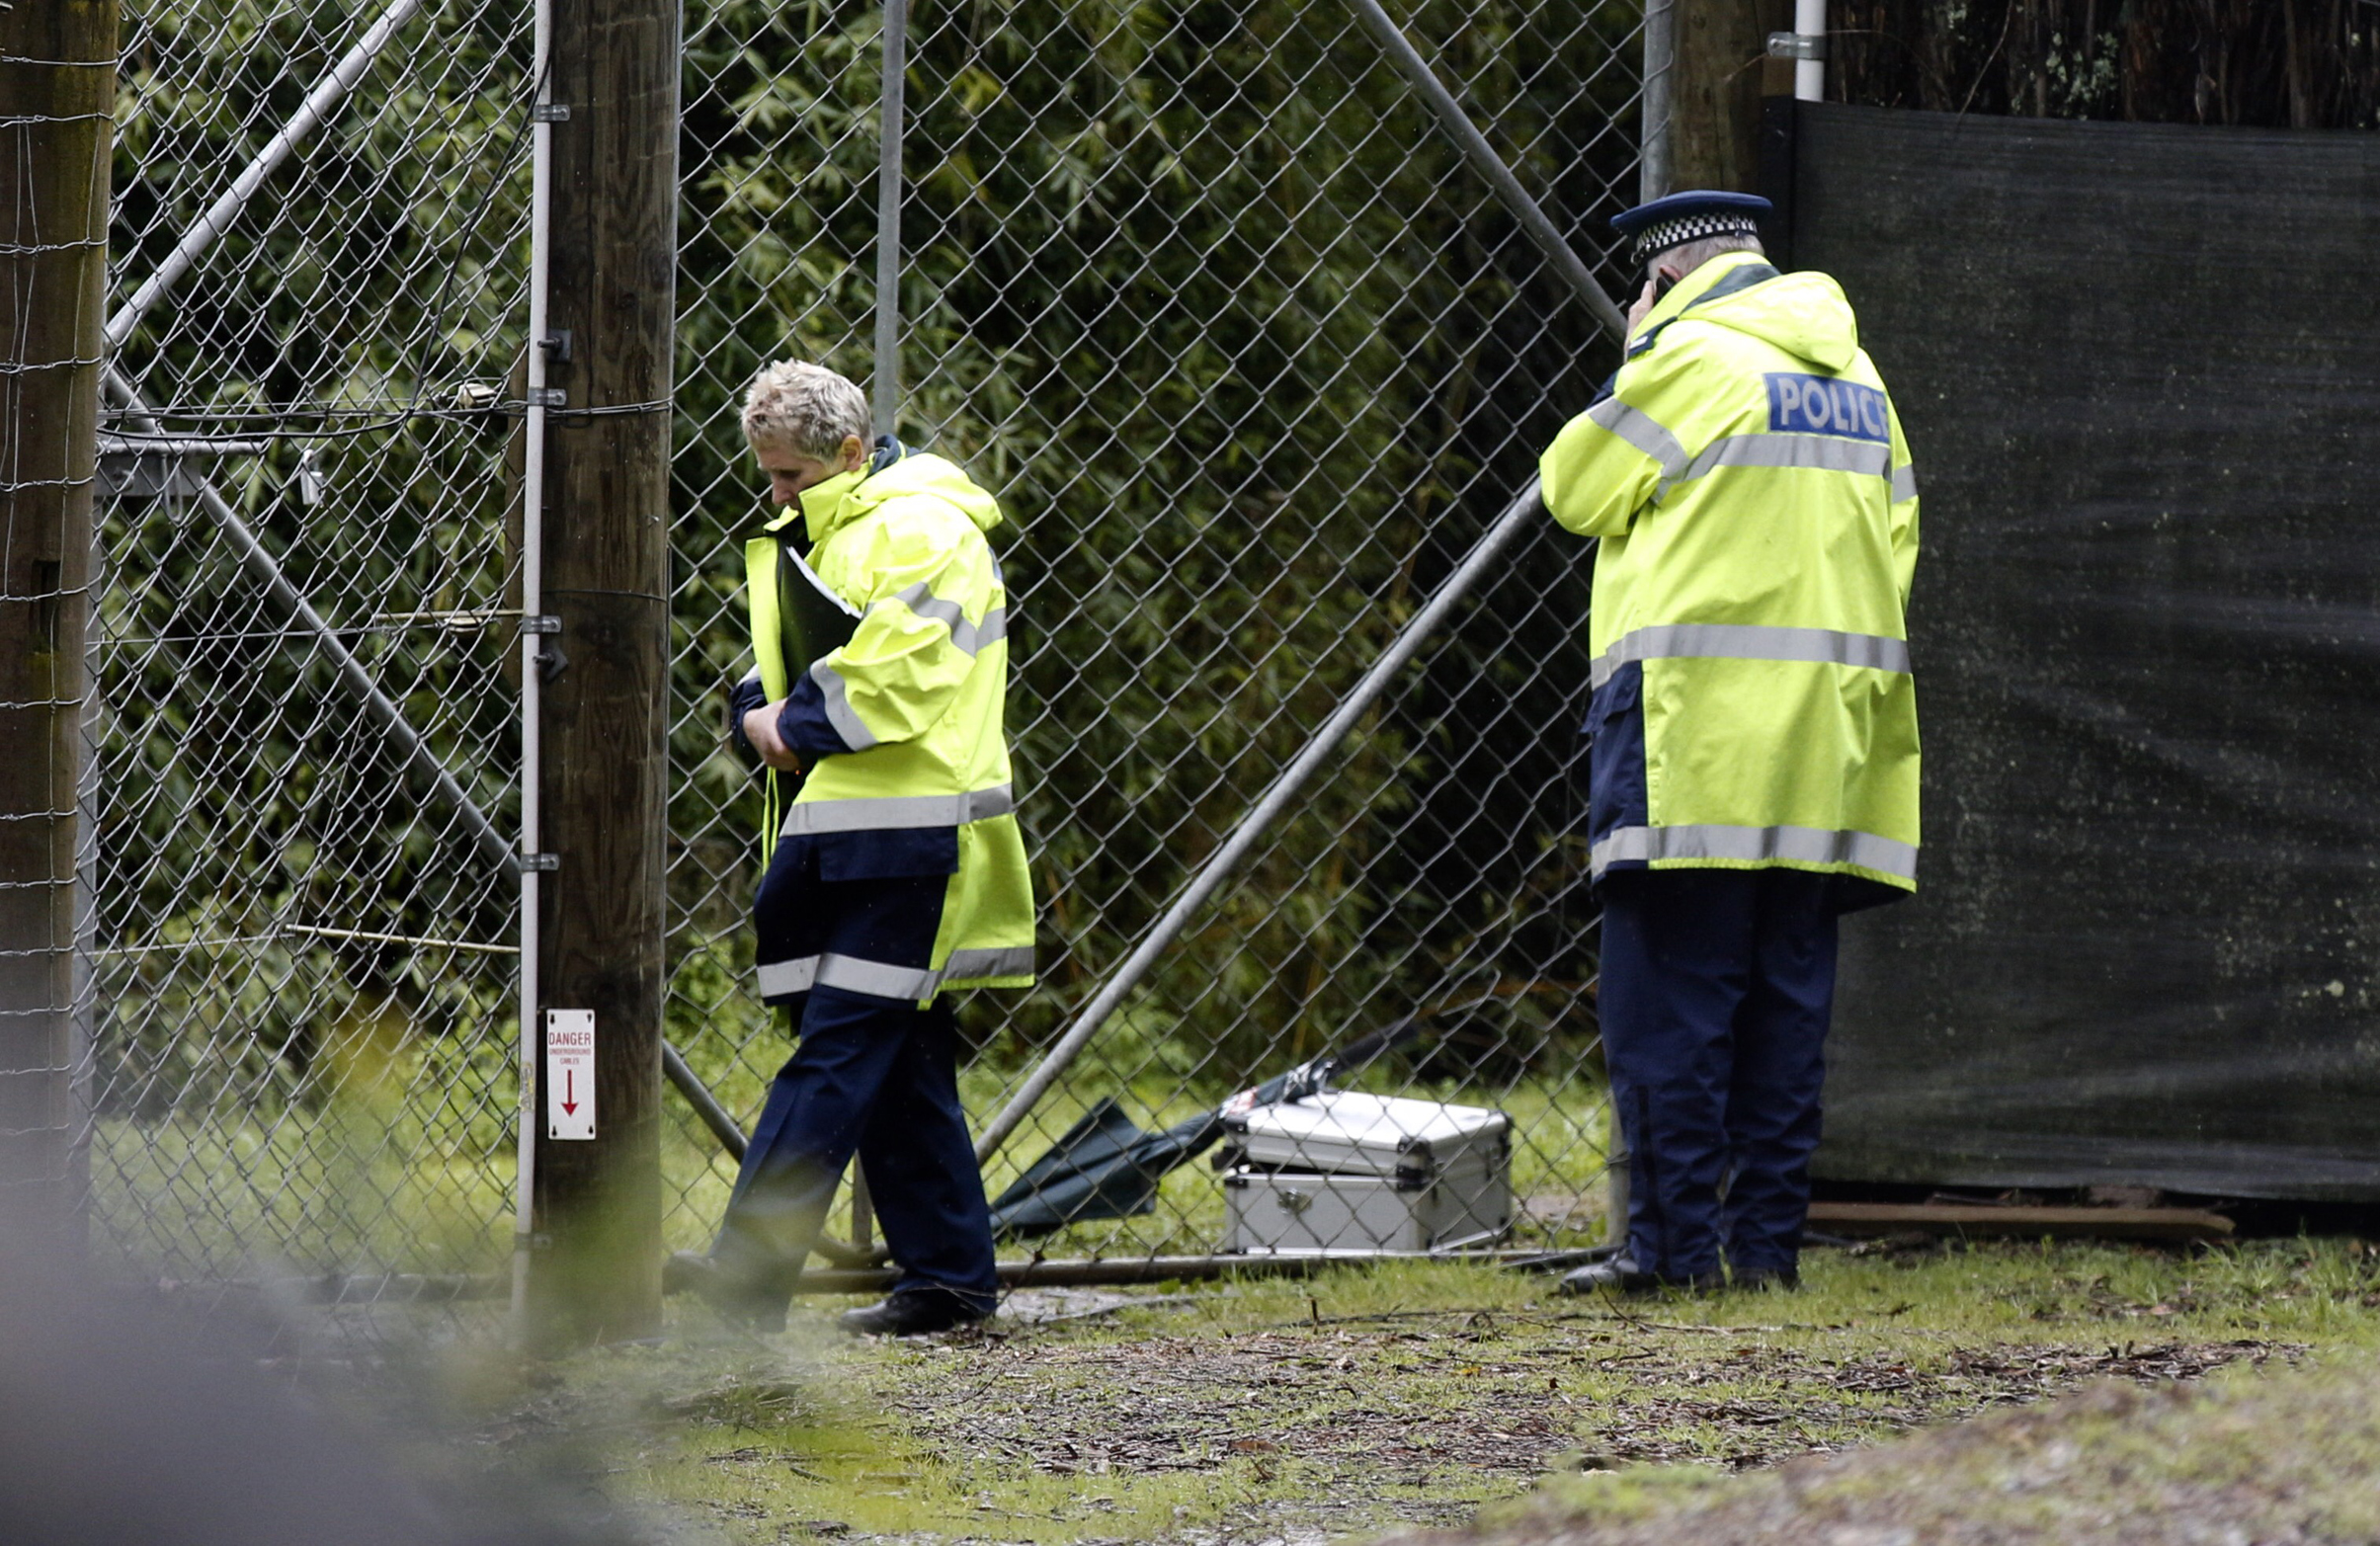 Police stand at the shut gates at Hamilton Zoo after a female zookeeper was killed by one of the tigers at the zoo in Hamilton, New Zealand, on Sept. 20, 2015 (Nick Reed—AP)